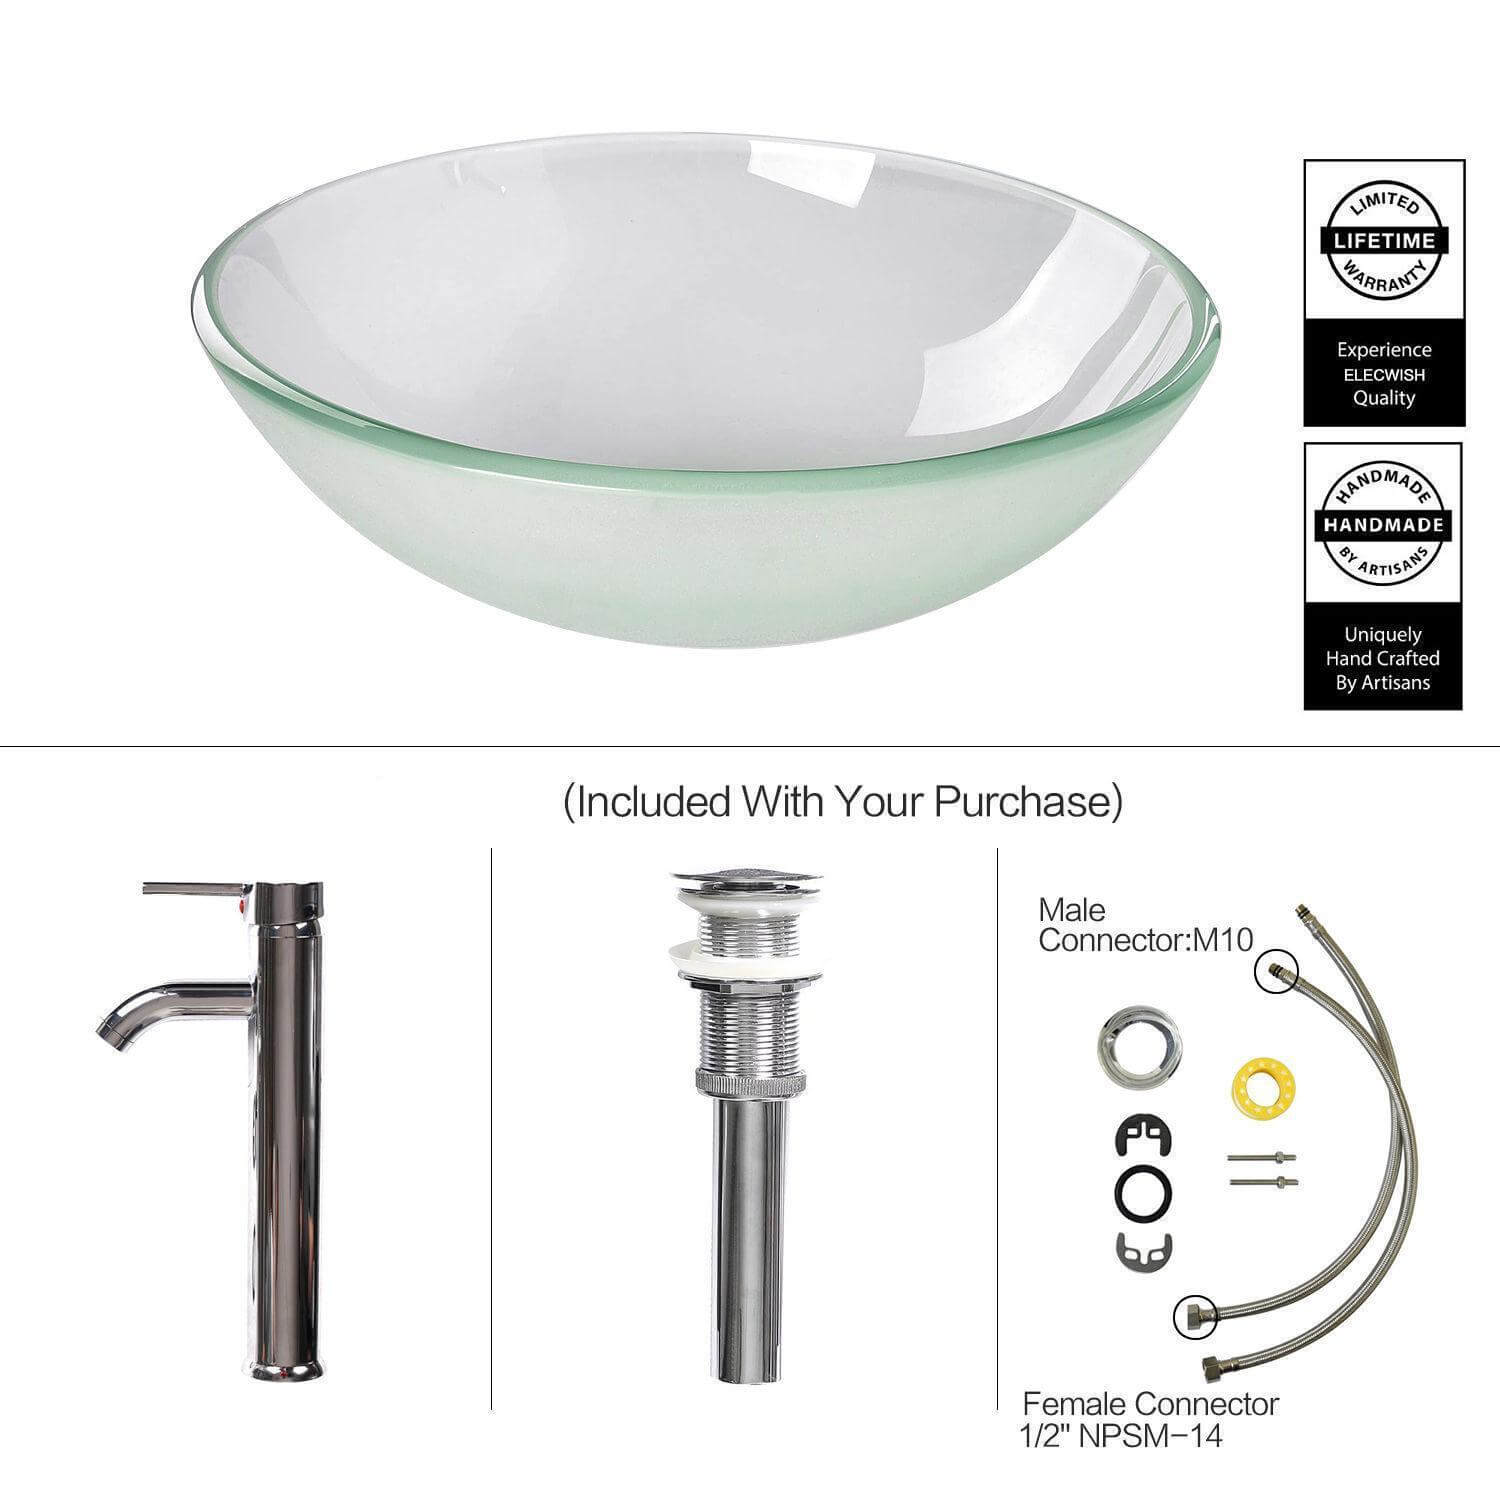 Elecwish Round Frosted Sink included parts